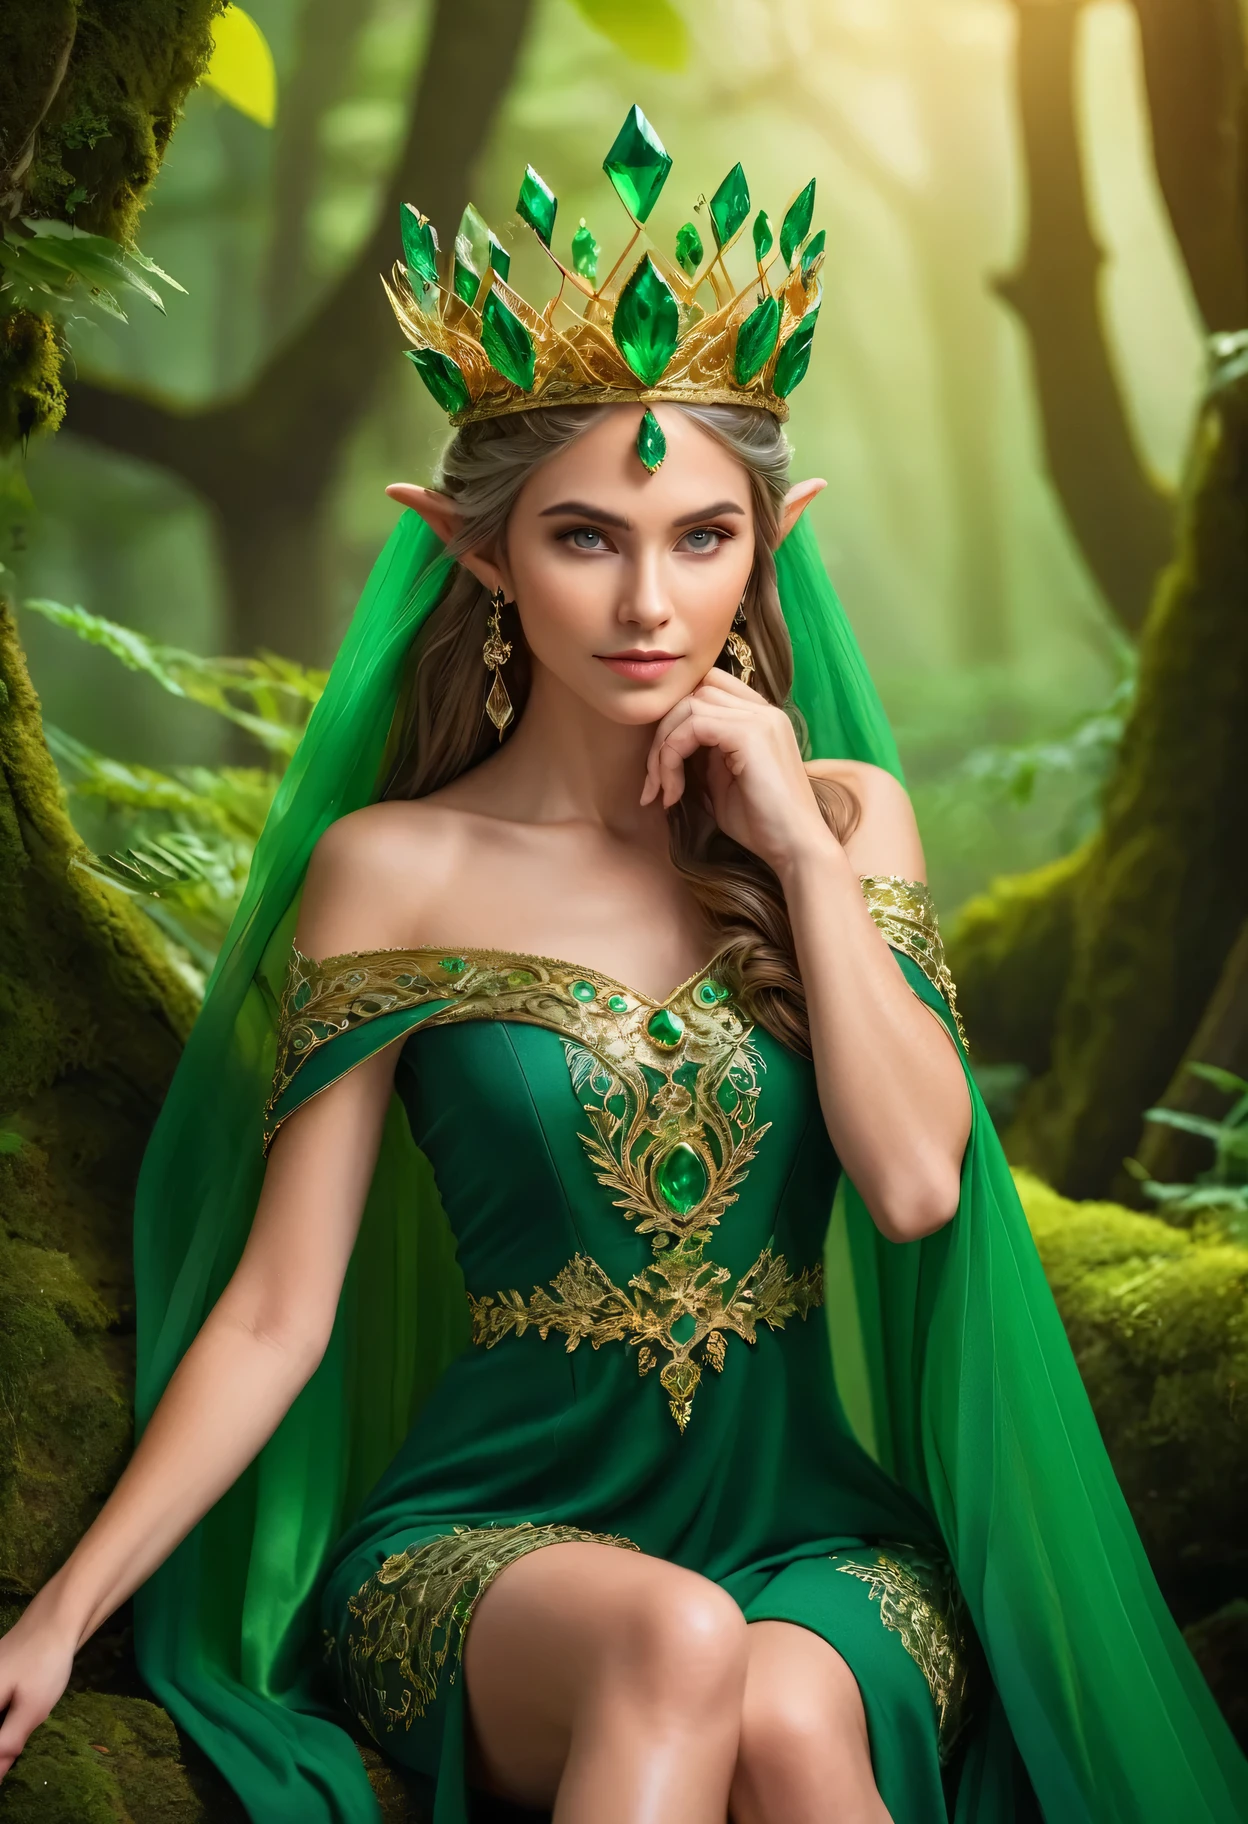 Professional photography for an elite magazine, the Elf Queen in chic forest elf clothes with intricate green paintings, a magnificent dress, on her head an elegant crown of intricate interweaving of golden threads, the Elf Queen poses, in her hand a crystal crystal glowing green from inside, shod in soft expensive boots, the Elf Queen looks at the viewer, full pose, full the body, a worthy pose of a queen, winks, Canon EOS R5 camera with Canon RF lens 100-500 mm F4.5-7.1L IS USM, 500 mm, 1/500 sec., f/7.1 and ISO 1000.